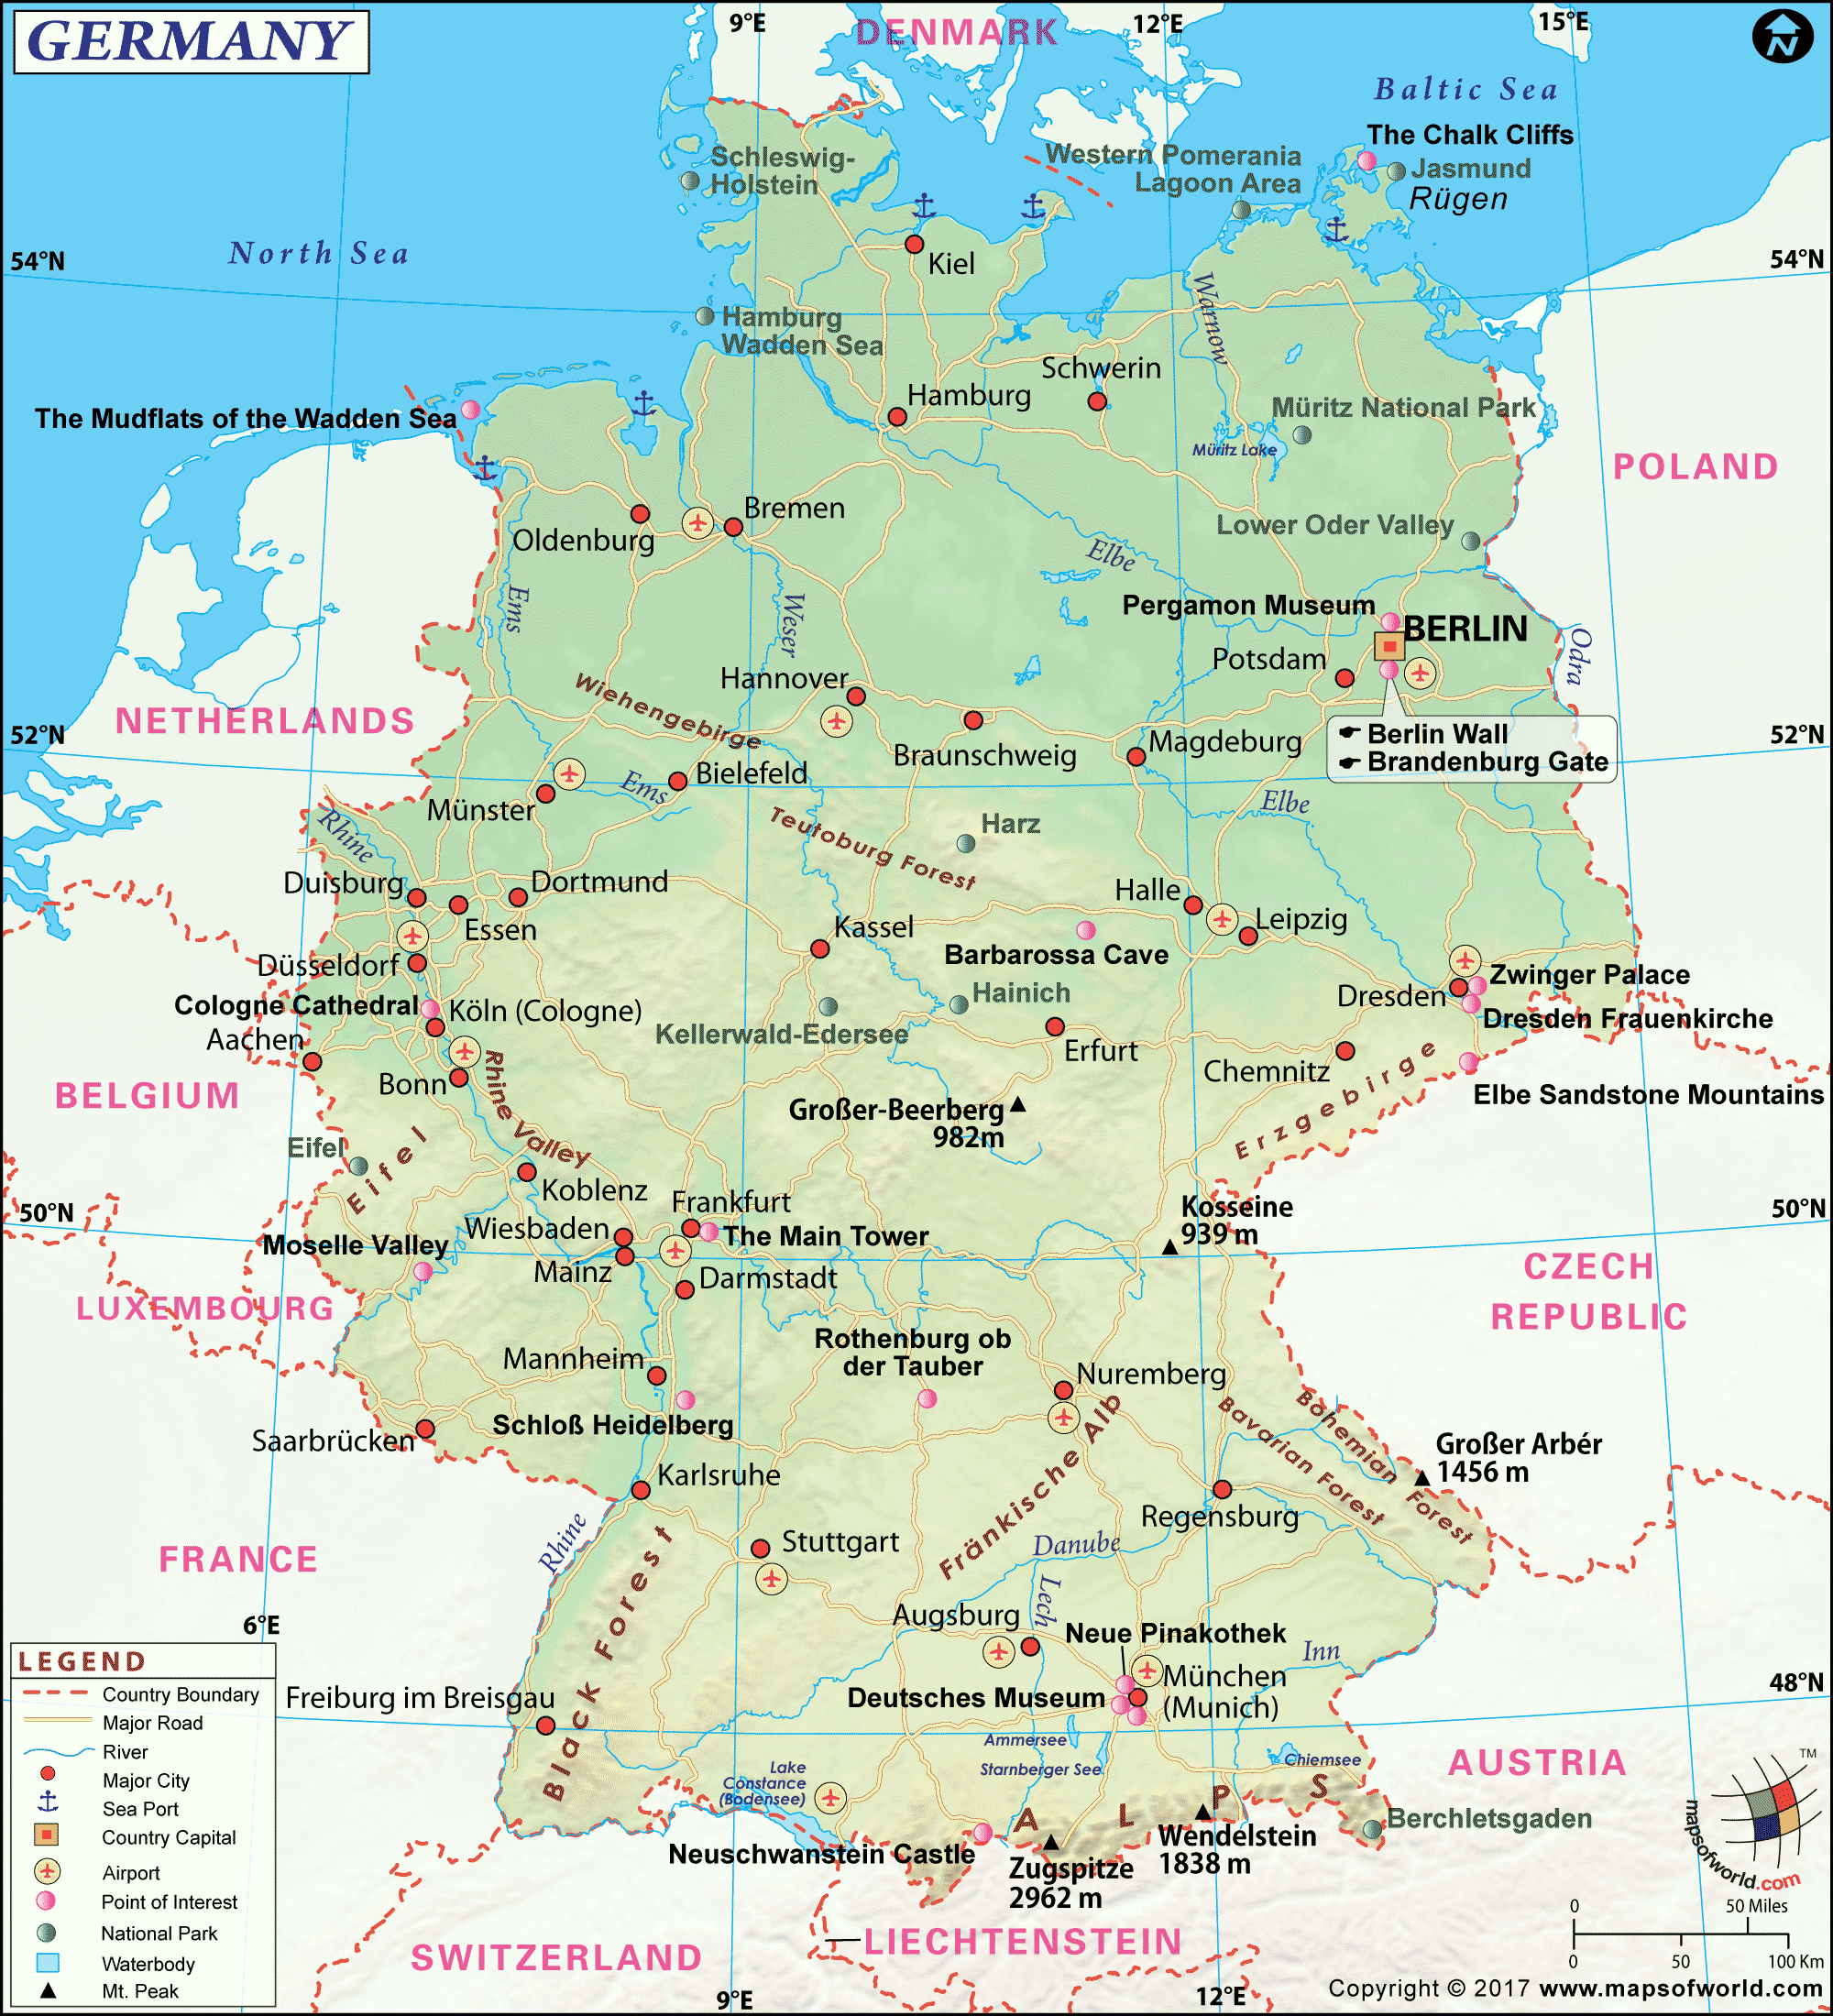 Large Germany Map Image. Large Germany Map HD Picture